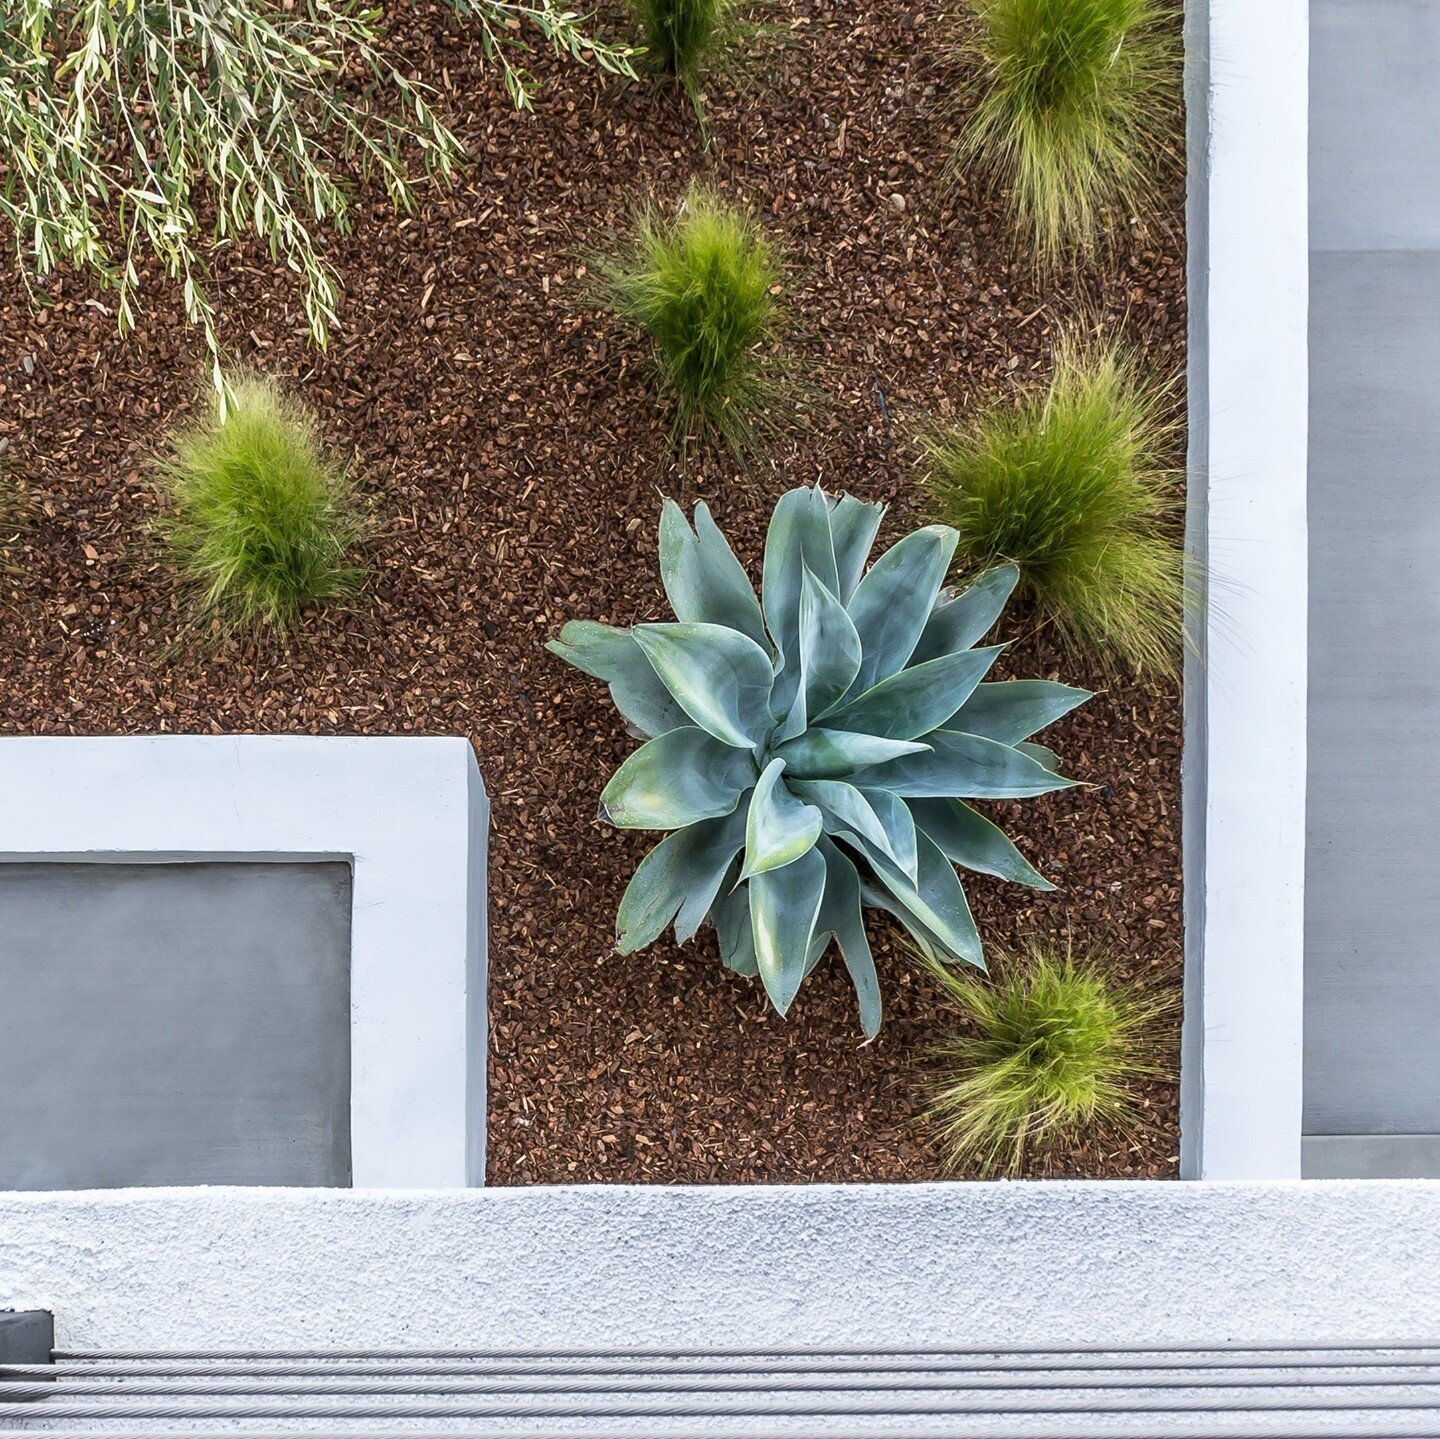 A birds eye view of the garden below highlights an Agave attenuata 'Boutin Blue' looking luminous and catching the eye of anyone who walks up to this front door.⁣
⁣
⁣
#southpark_branchout #branchoutwithjenny⁣
📸 : Emma Almendarez